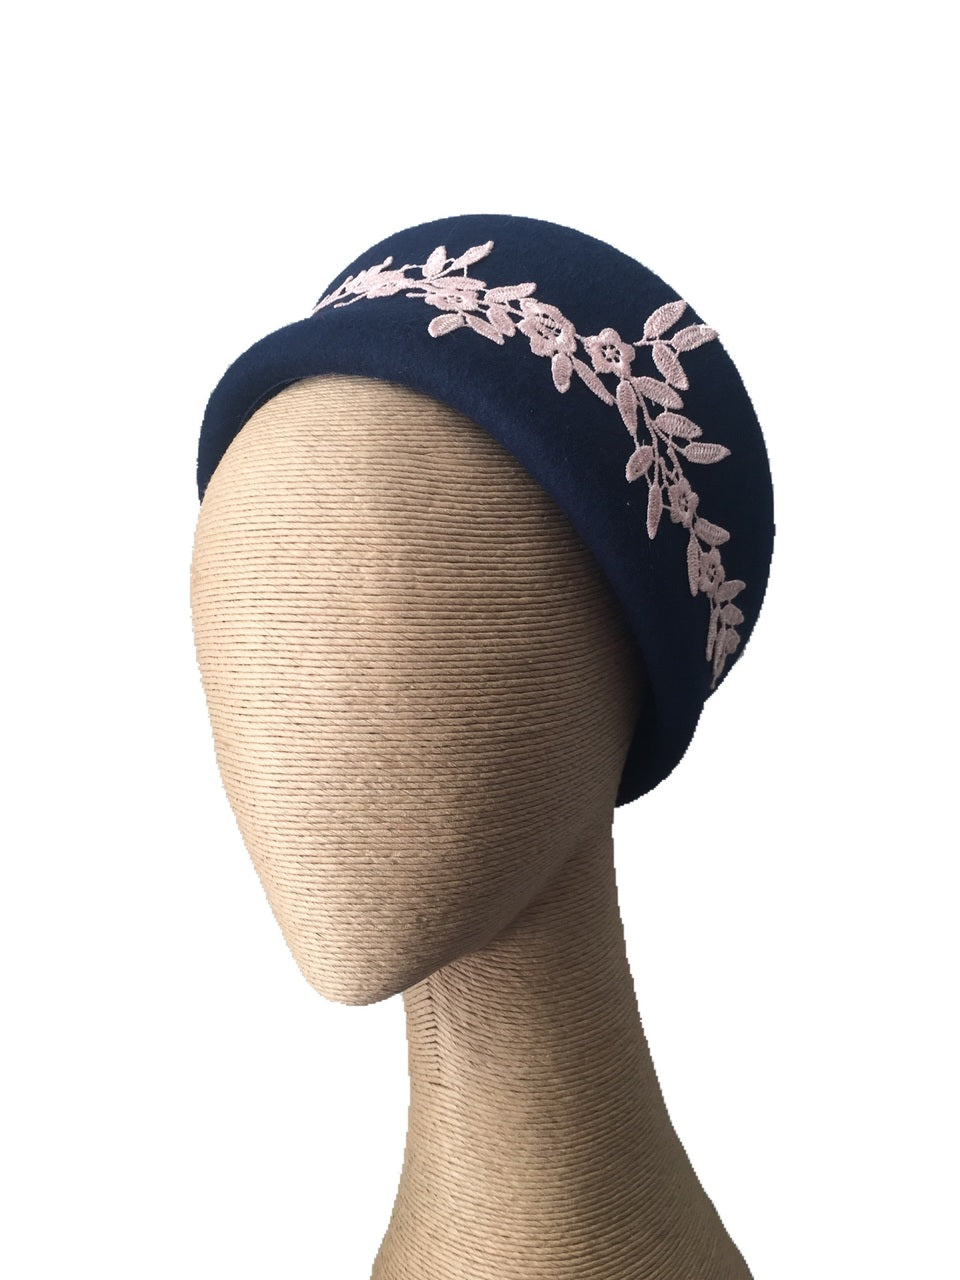 Max Alexander Jackie Felt Hat in Navy with Pink Lace